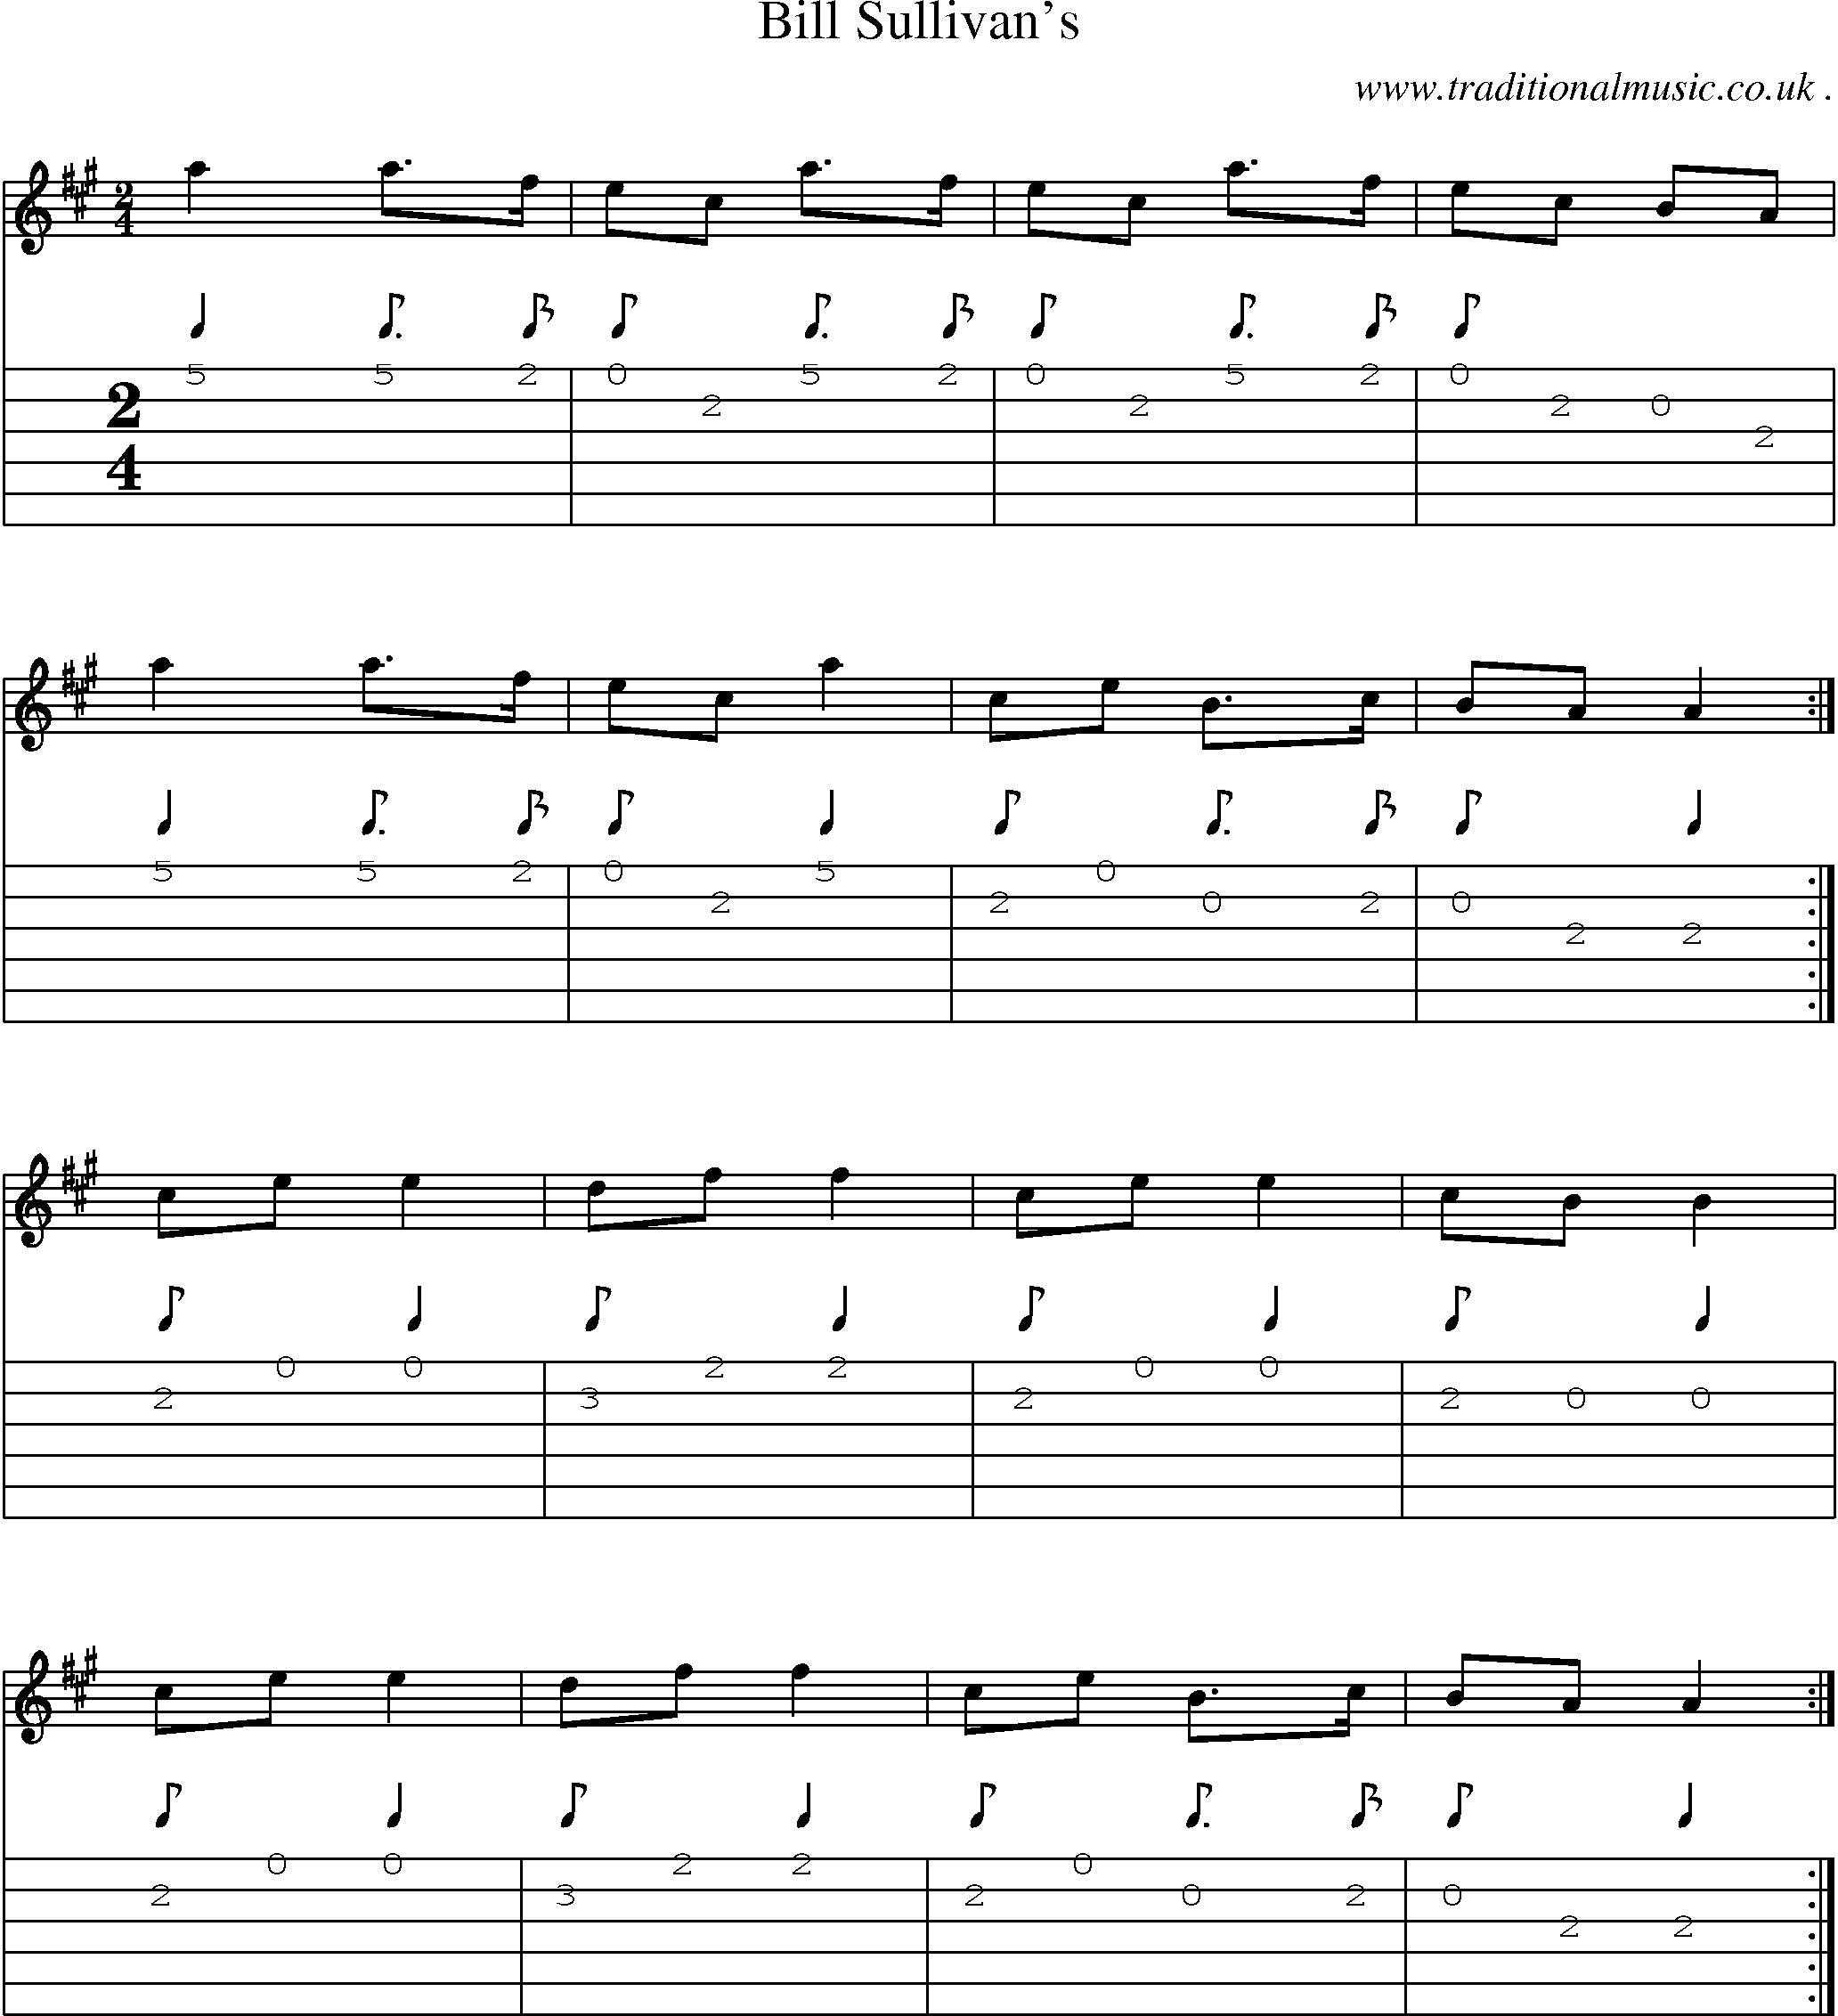 Sheet-Music and Guitar Tabs for Bill Sullivans